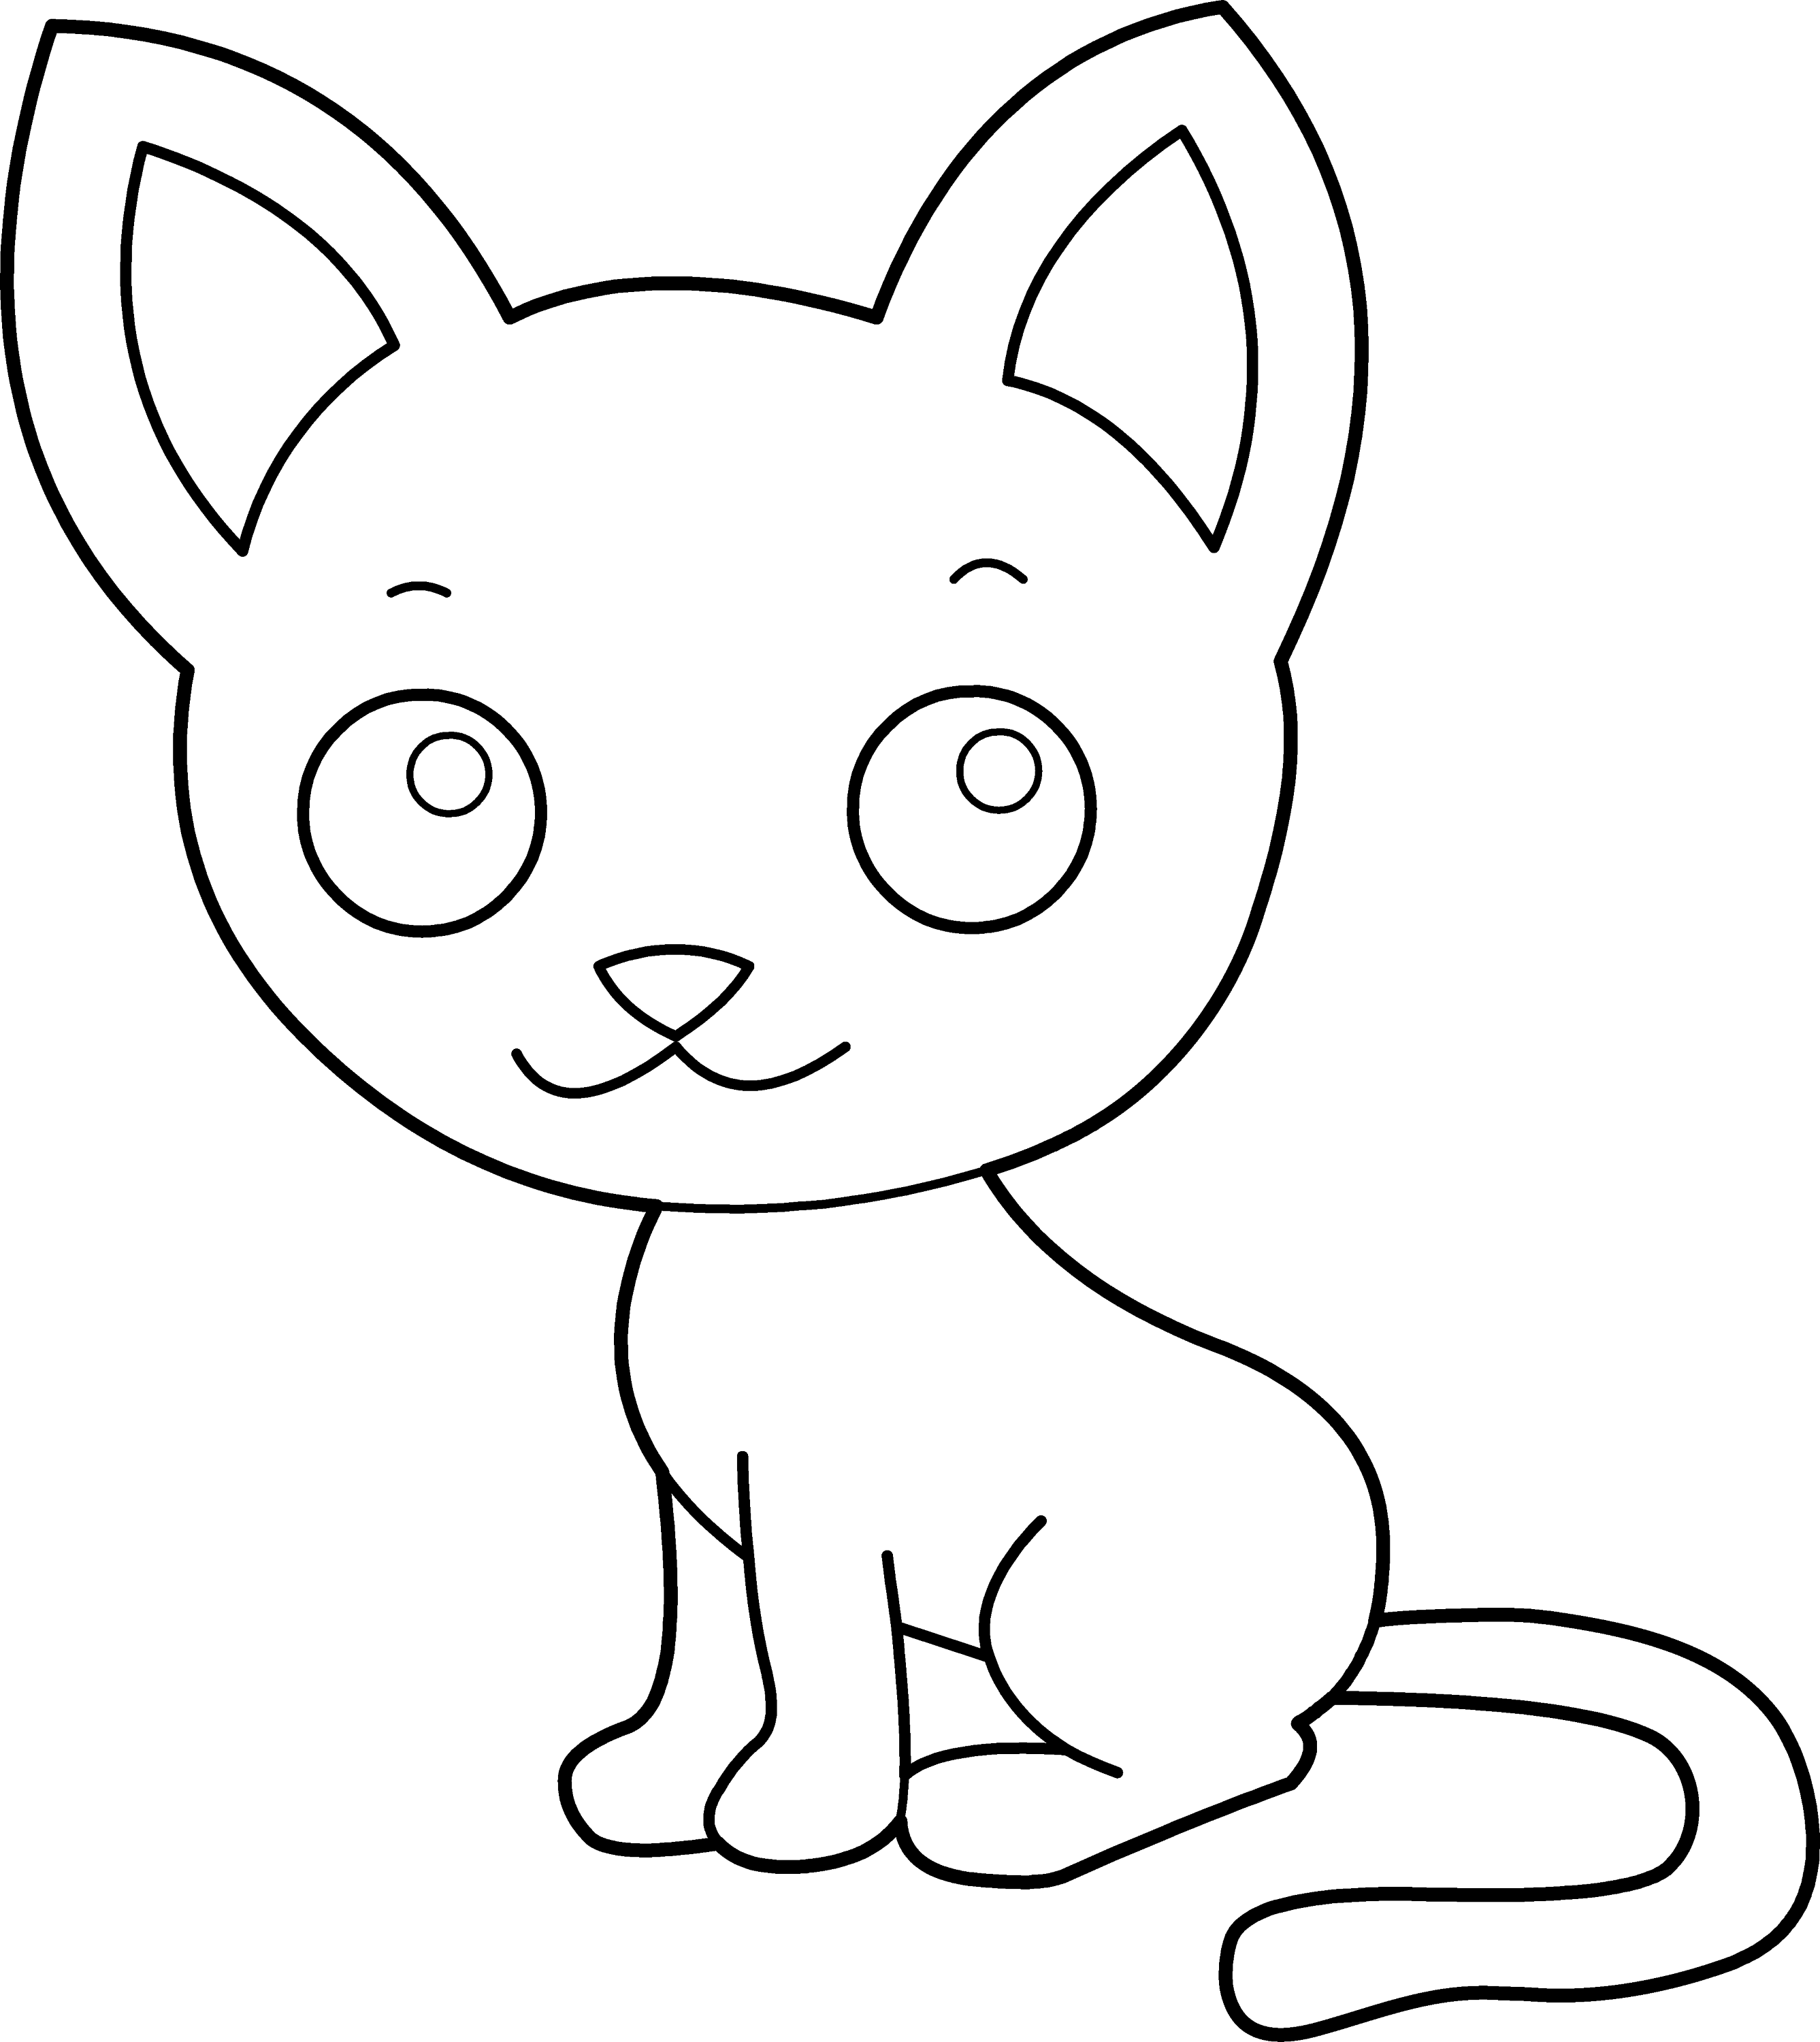 Cute Kitty Cat Coloring Page Free Clip Art